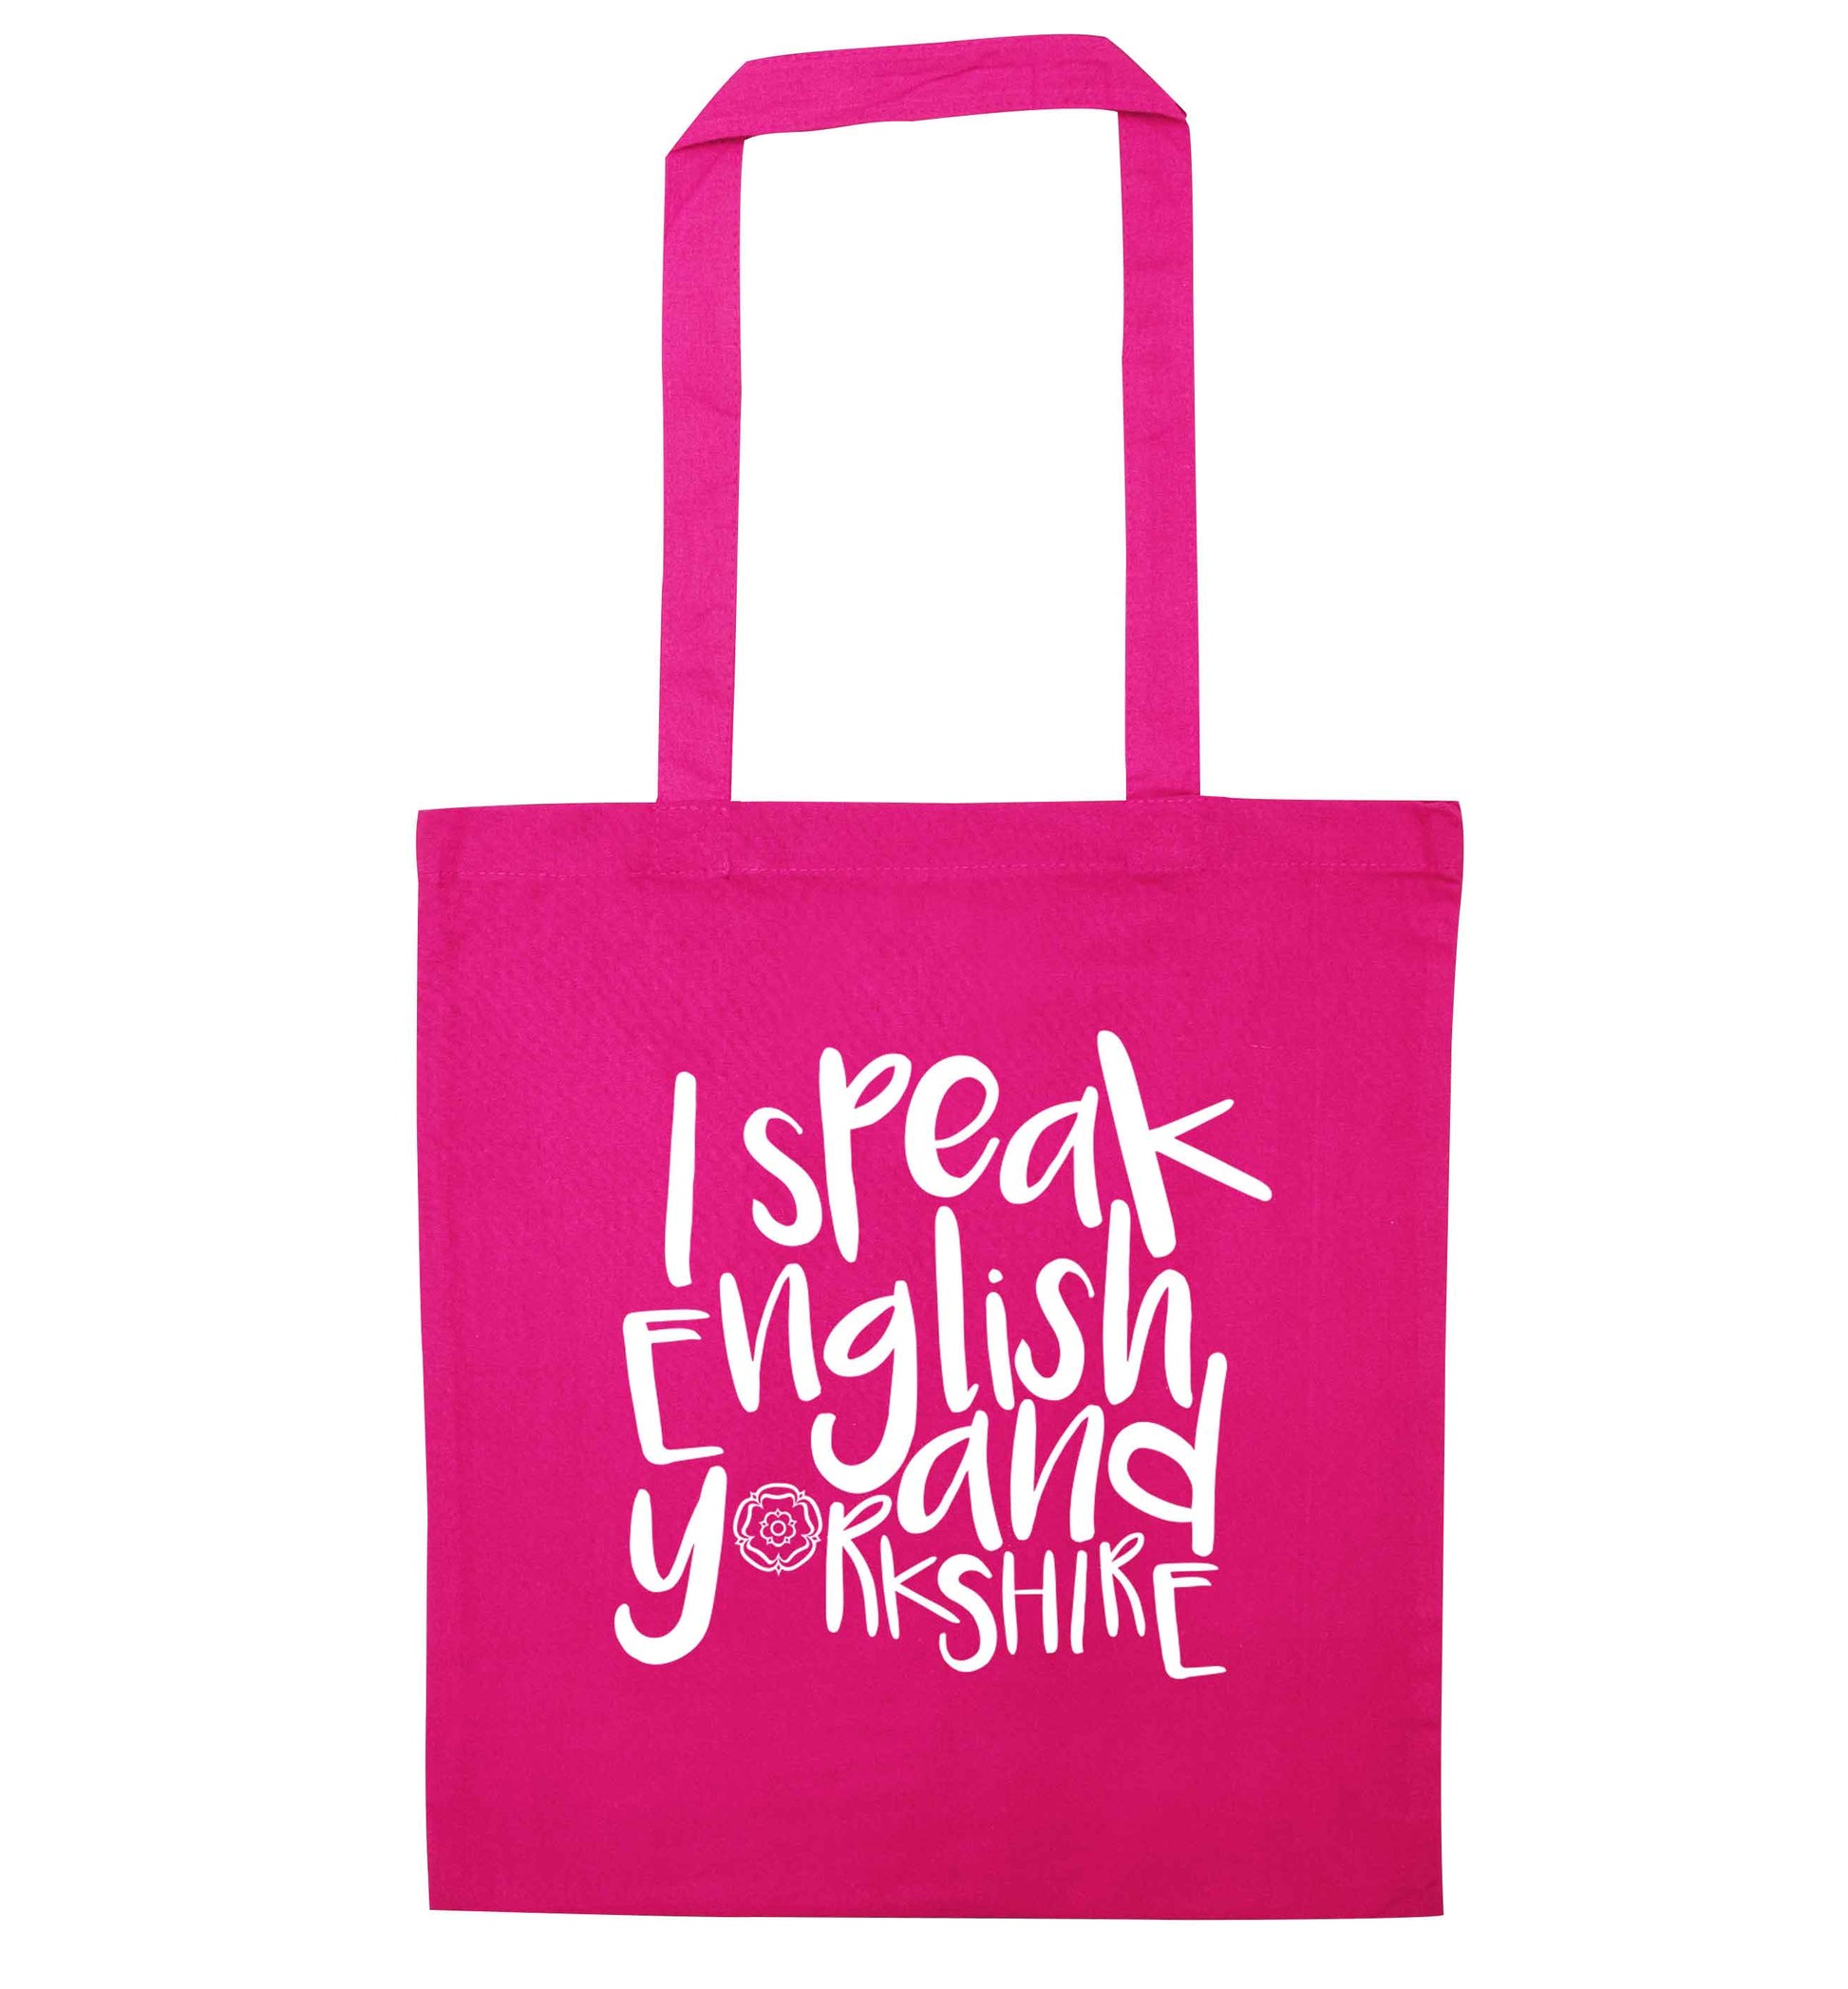 I speak English and Yorkshire pink tote bag